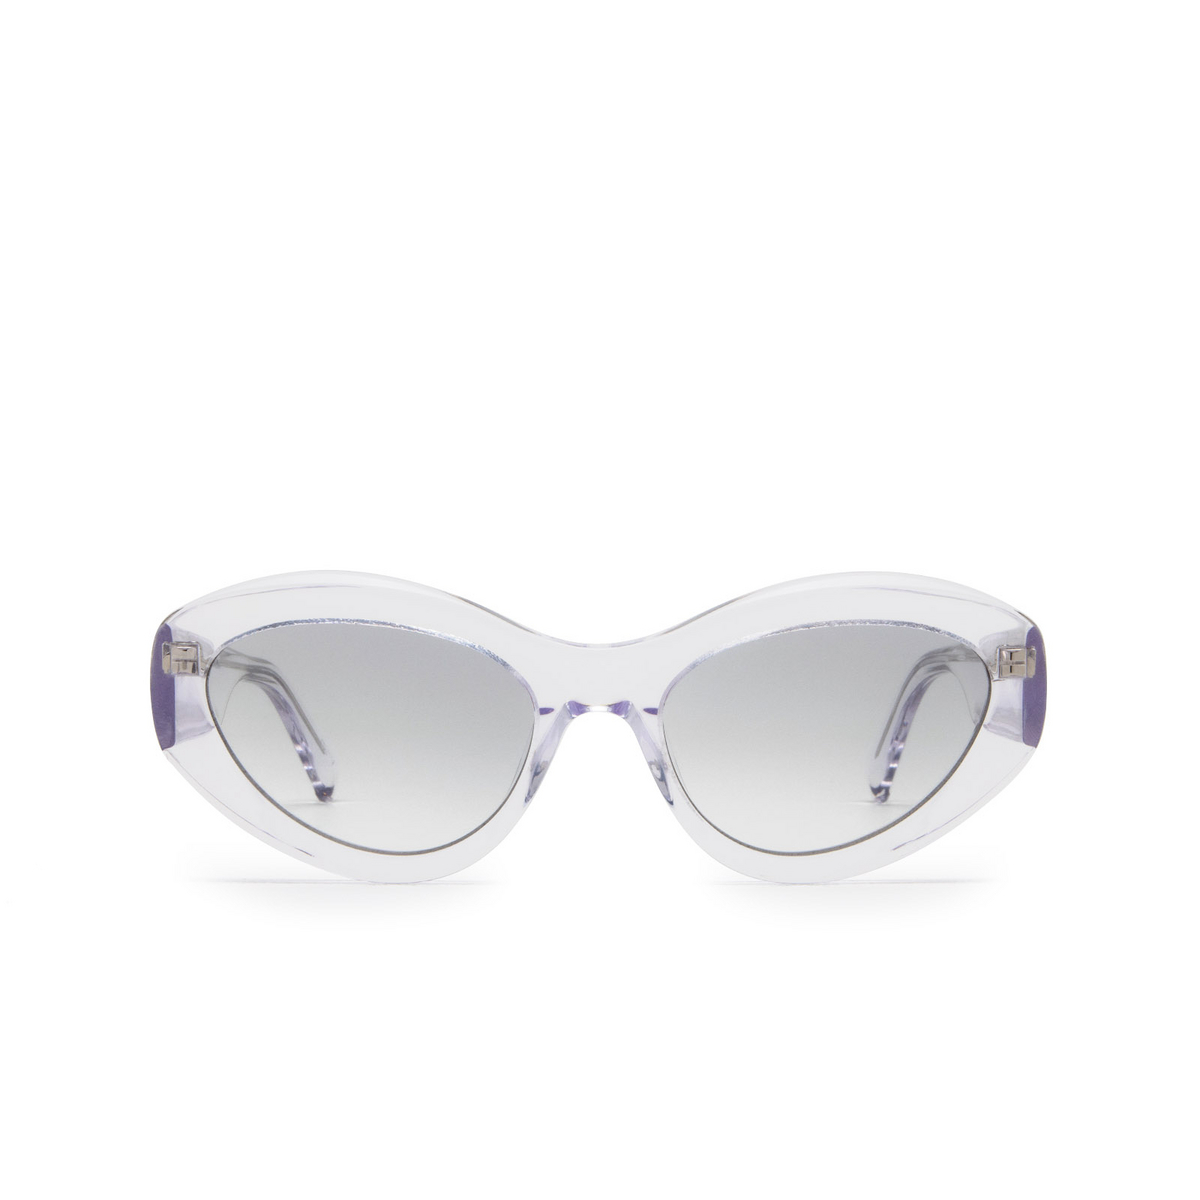 Chimi® Cat-eye Sunglasses: 09 color Clear - front view